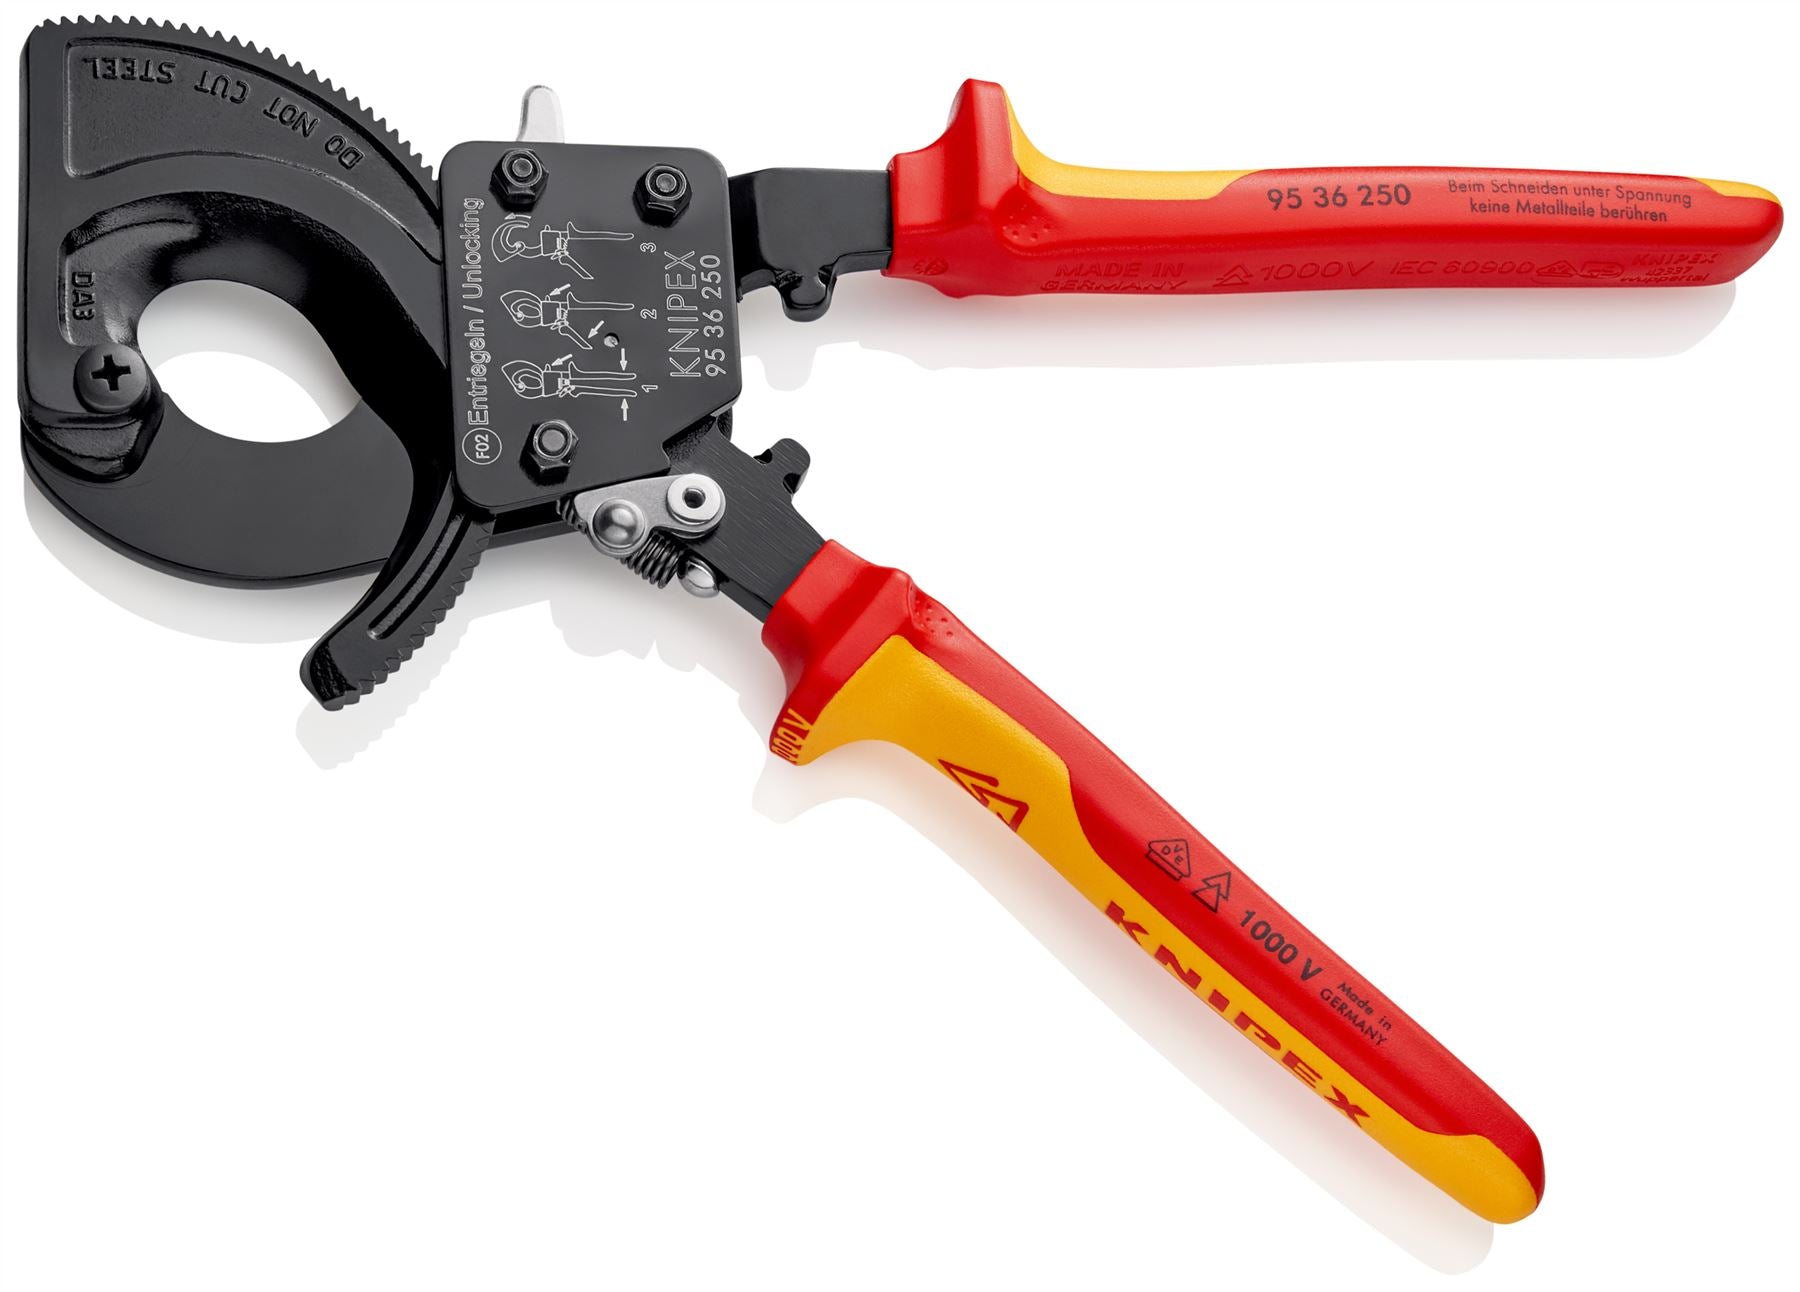 KNIPEX Cable Cutter Ratchet Action 32mm Diameter Cutting Capacity 250mm VDE Insulated Multi Component Grips 95 36 250